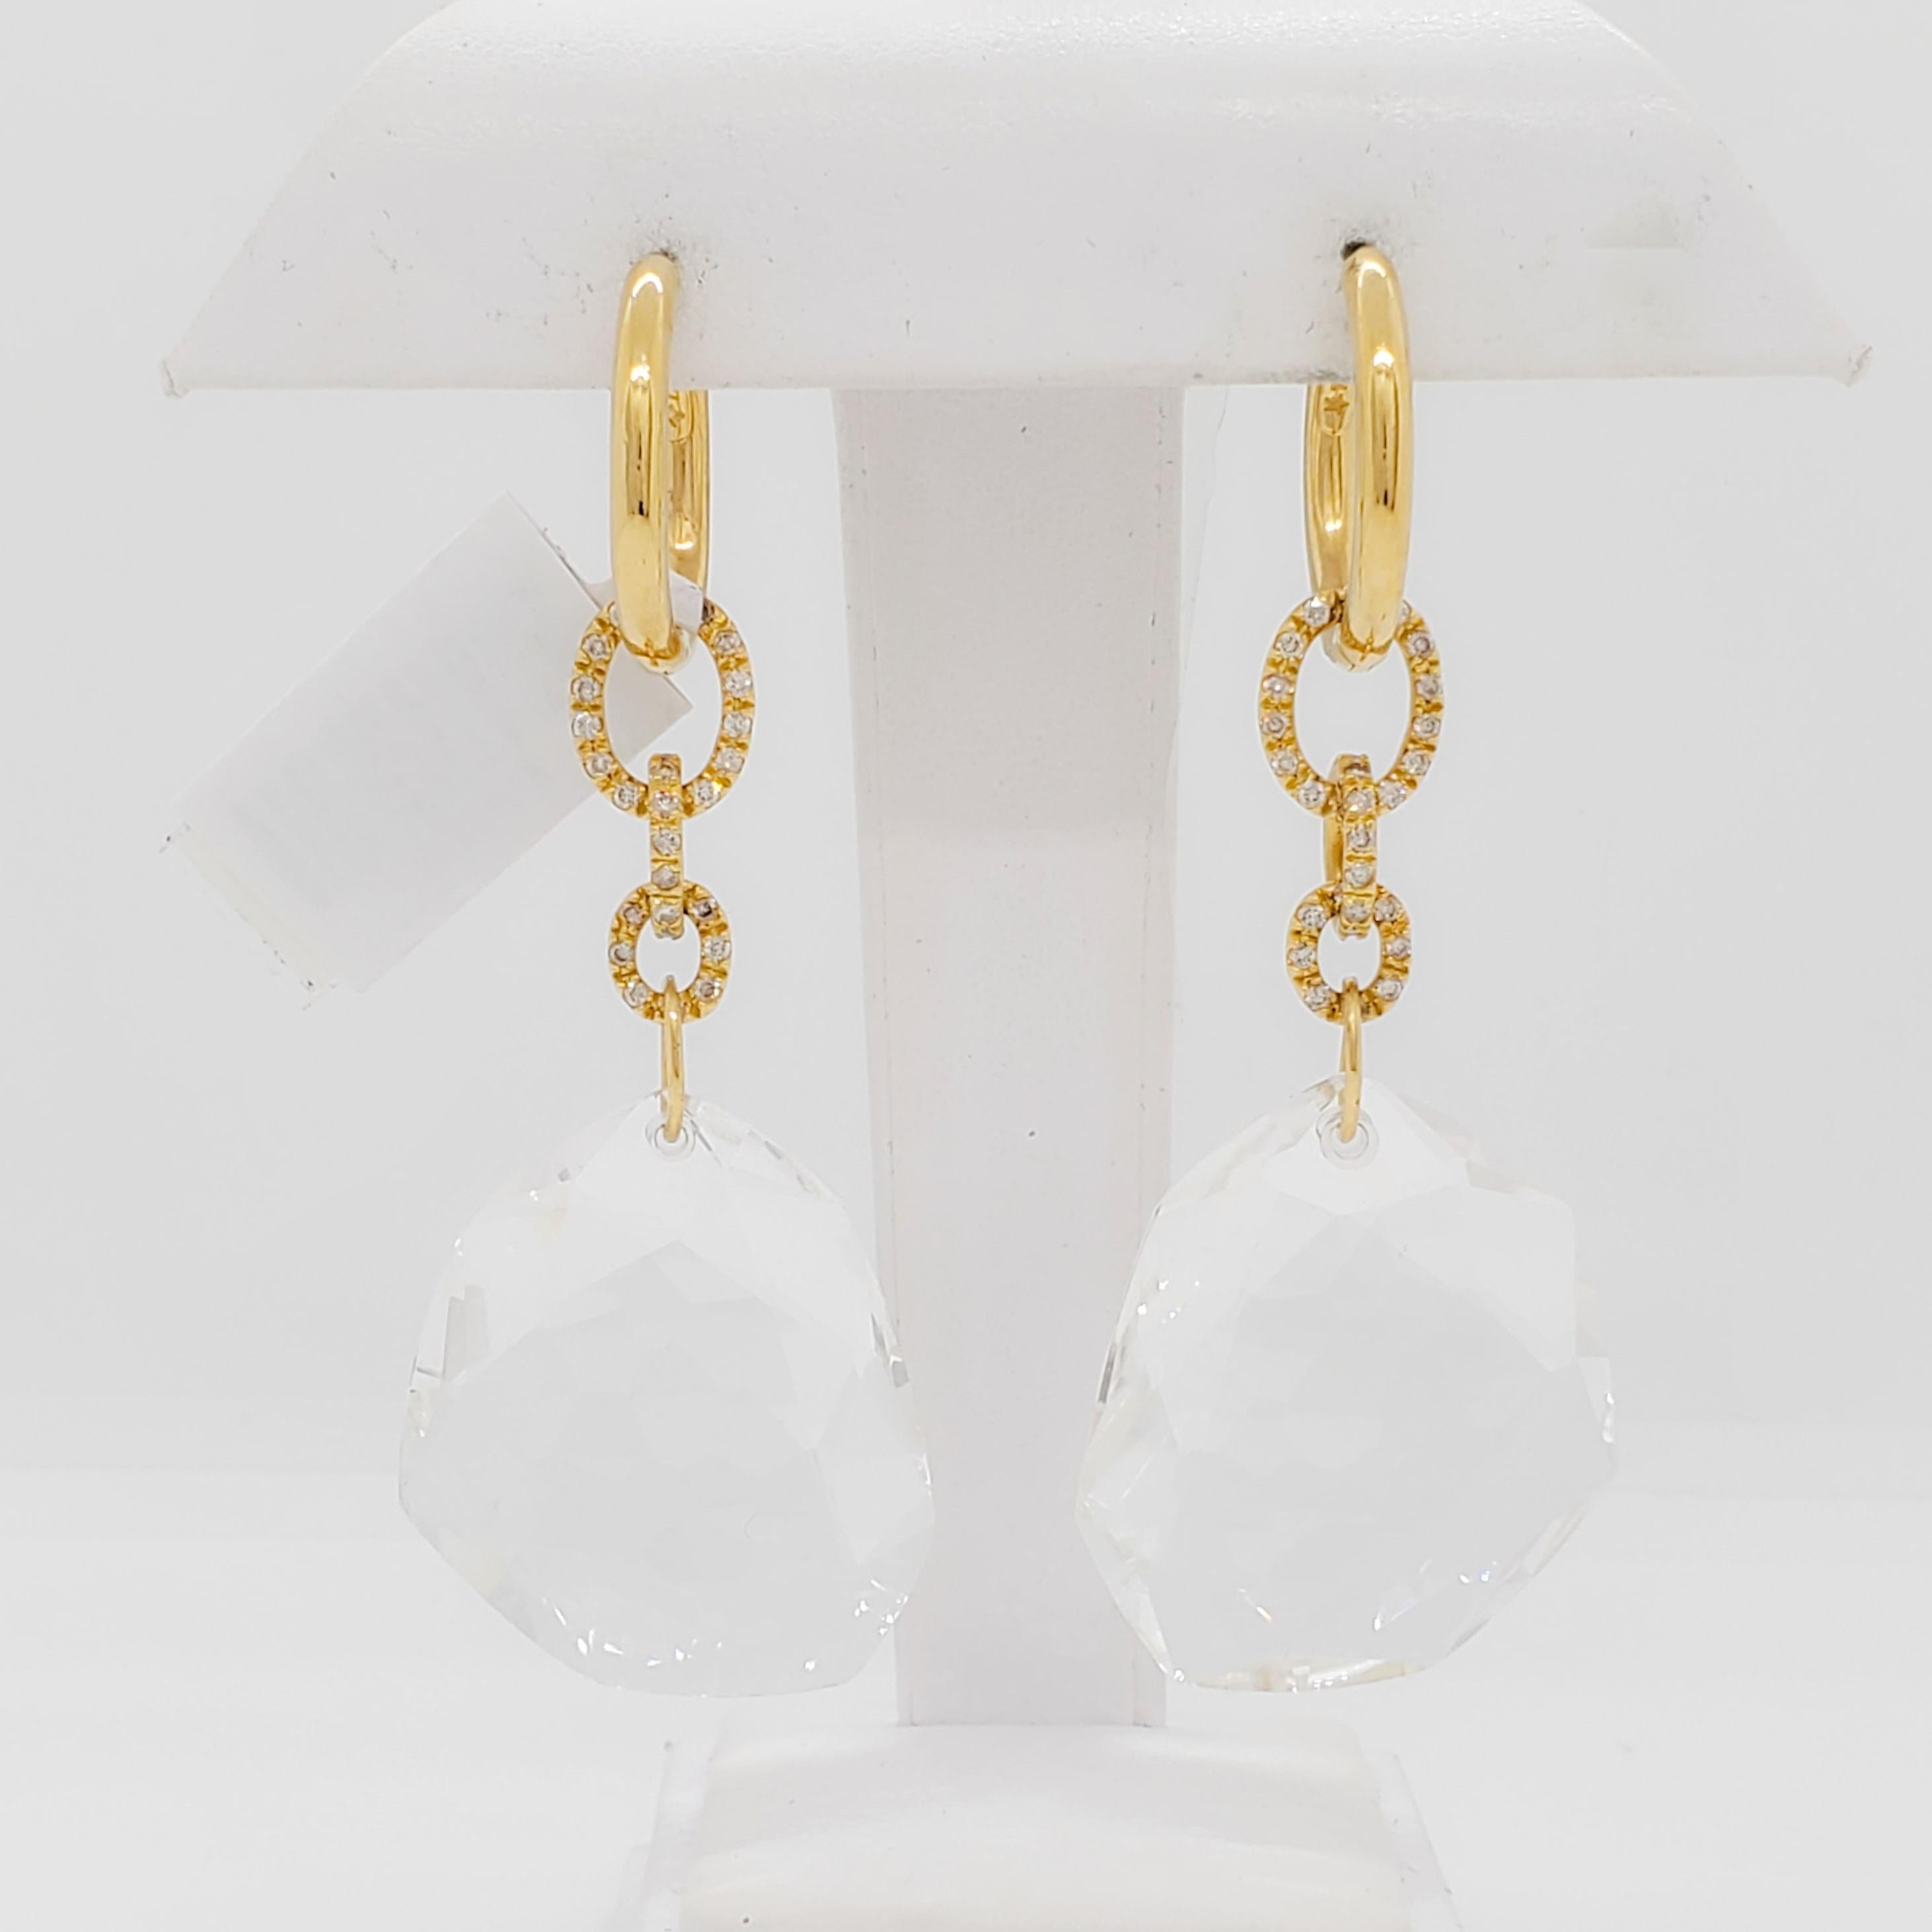 Absolutely gorgeous dangle earrings by H. Stern and famous designer Diane Von Furstenberg.  Featuring large white crystals and good quality white diamond rounds.  Handmade in 18k yellow gold. 